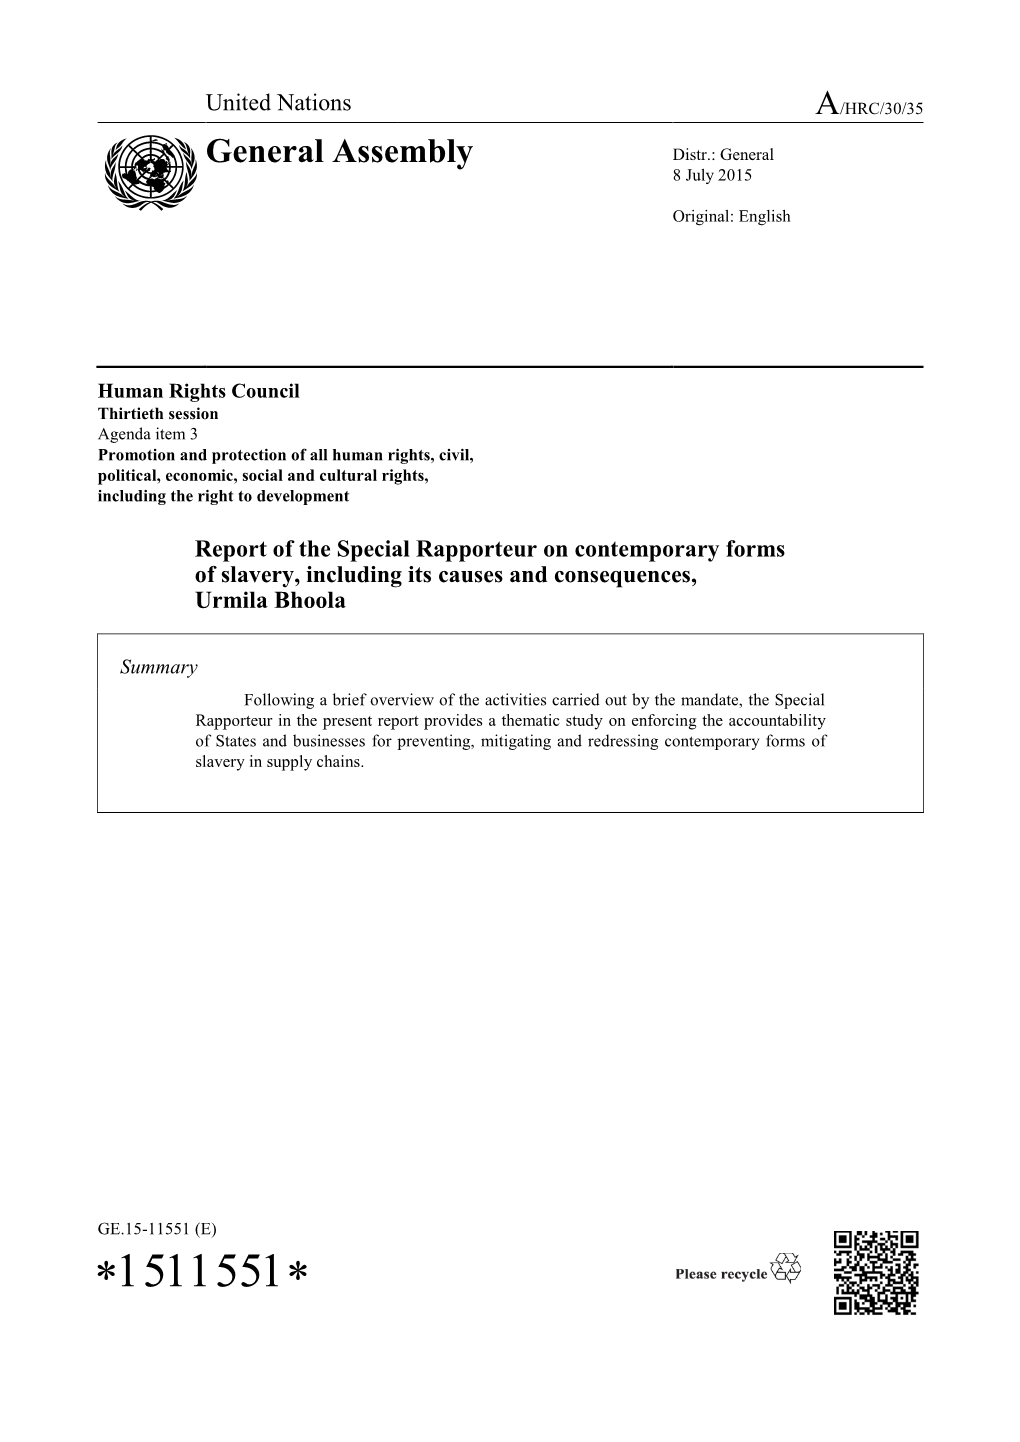 Report of the Special Rapporteur on Contemporary Forms of Slavery in English